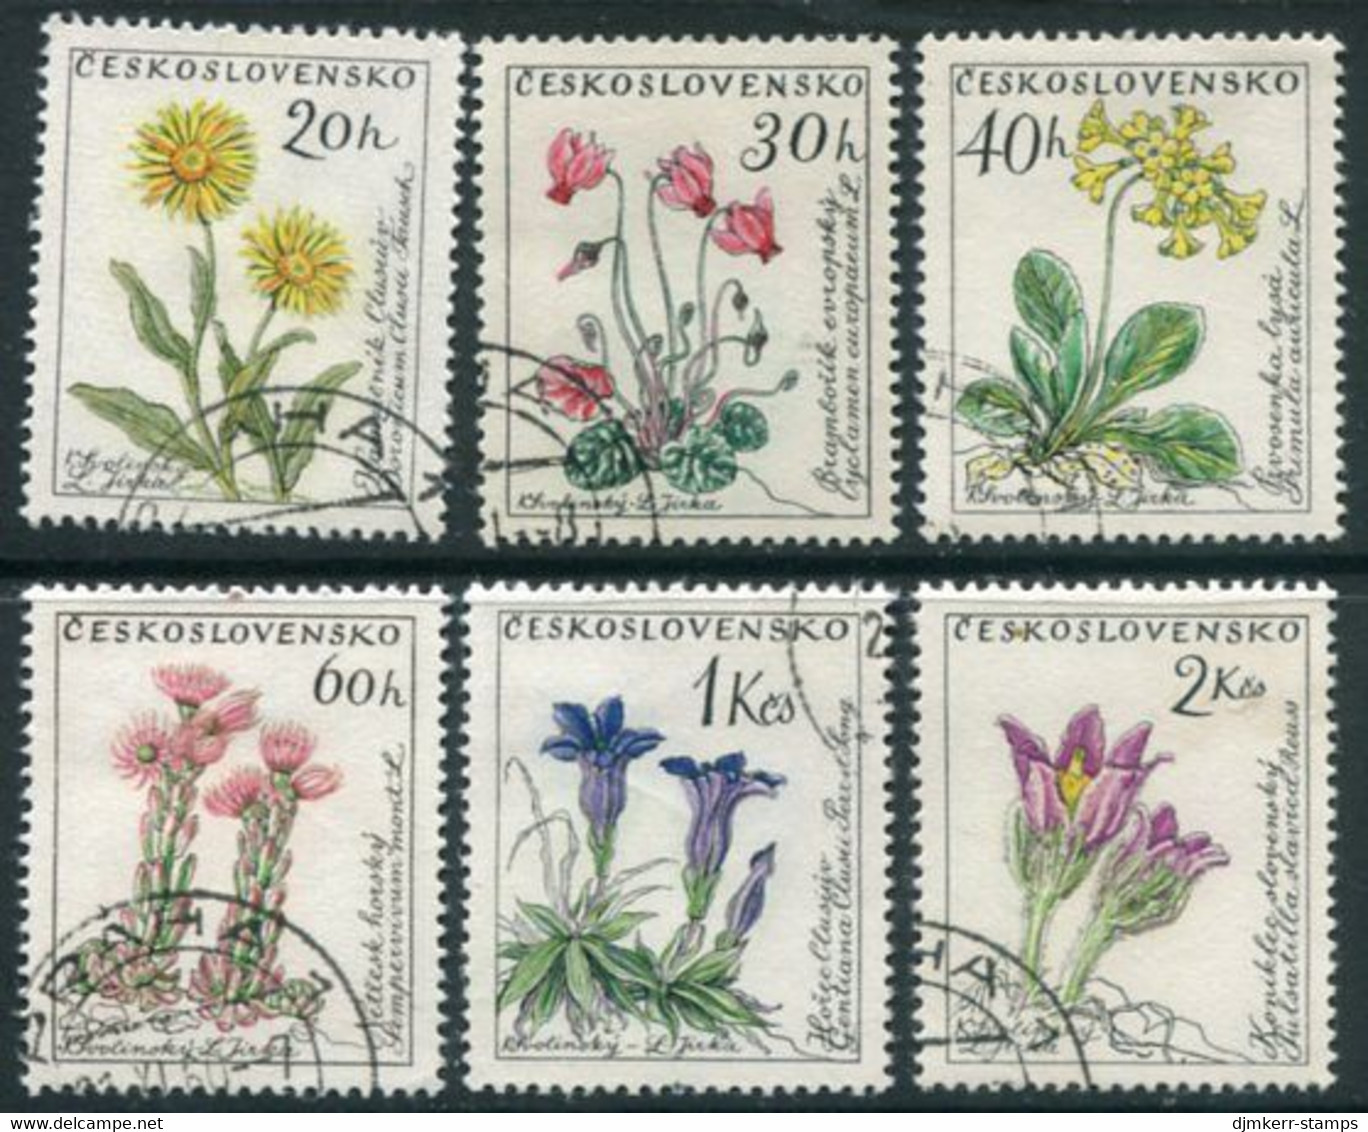 CZECHOSLOVAKIA 1960 Flowers Used.  Michel 1234-39 - Used Stamps